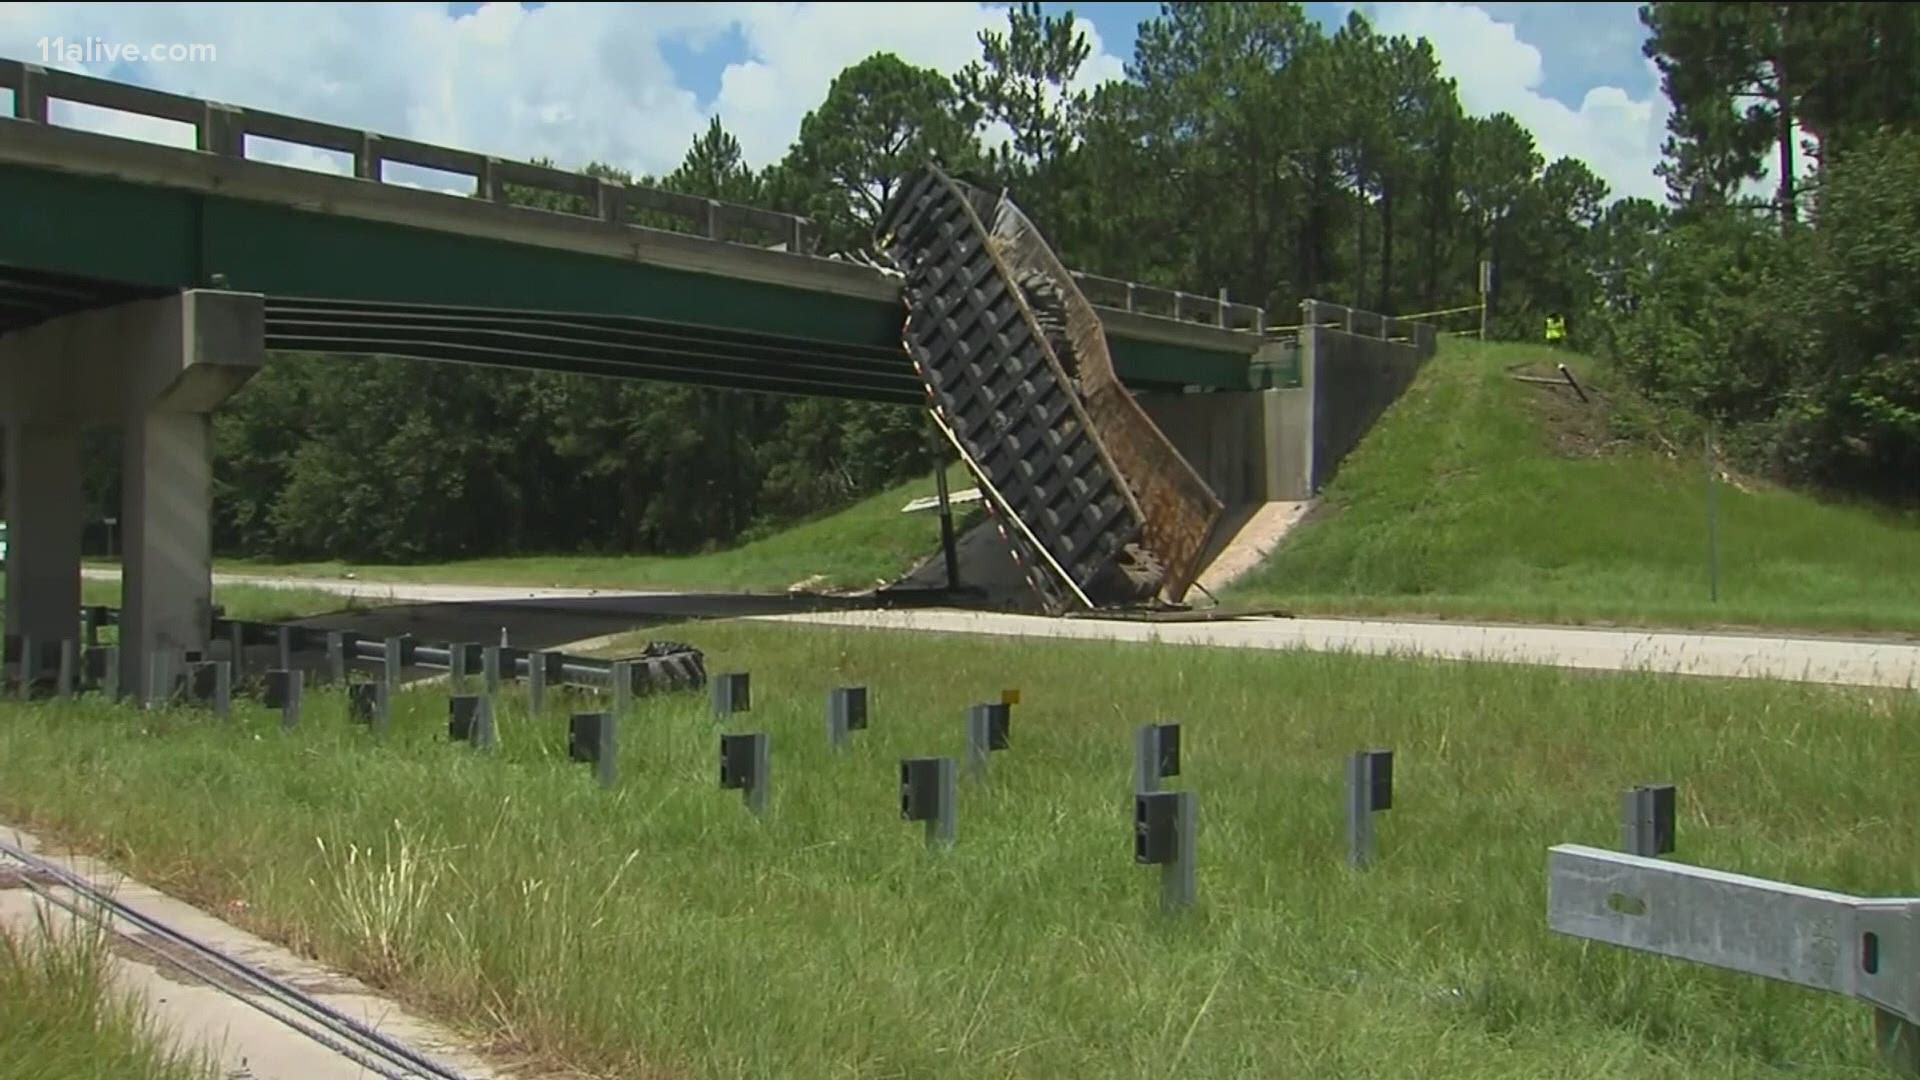 The accident caused significant detours and shut down I-16 for days as crews worked to demolish the bridge